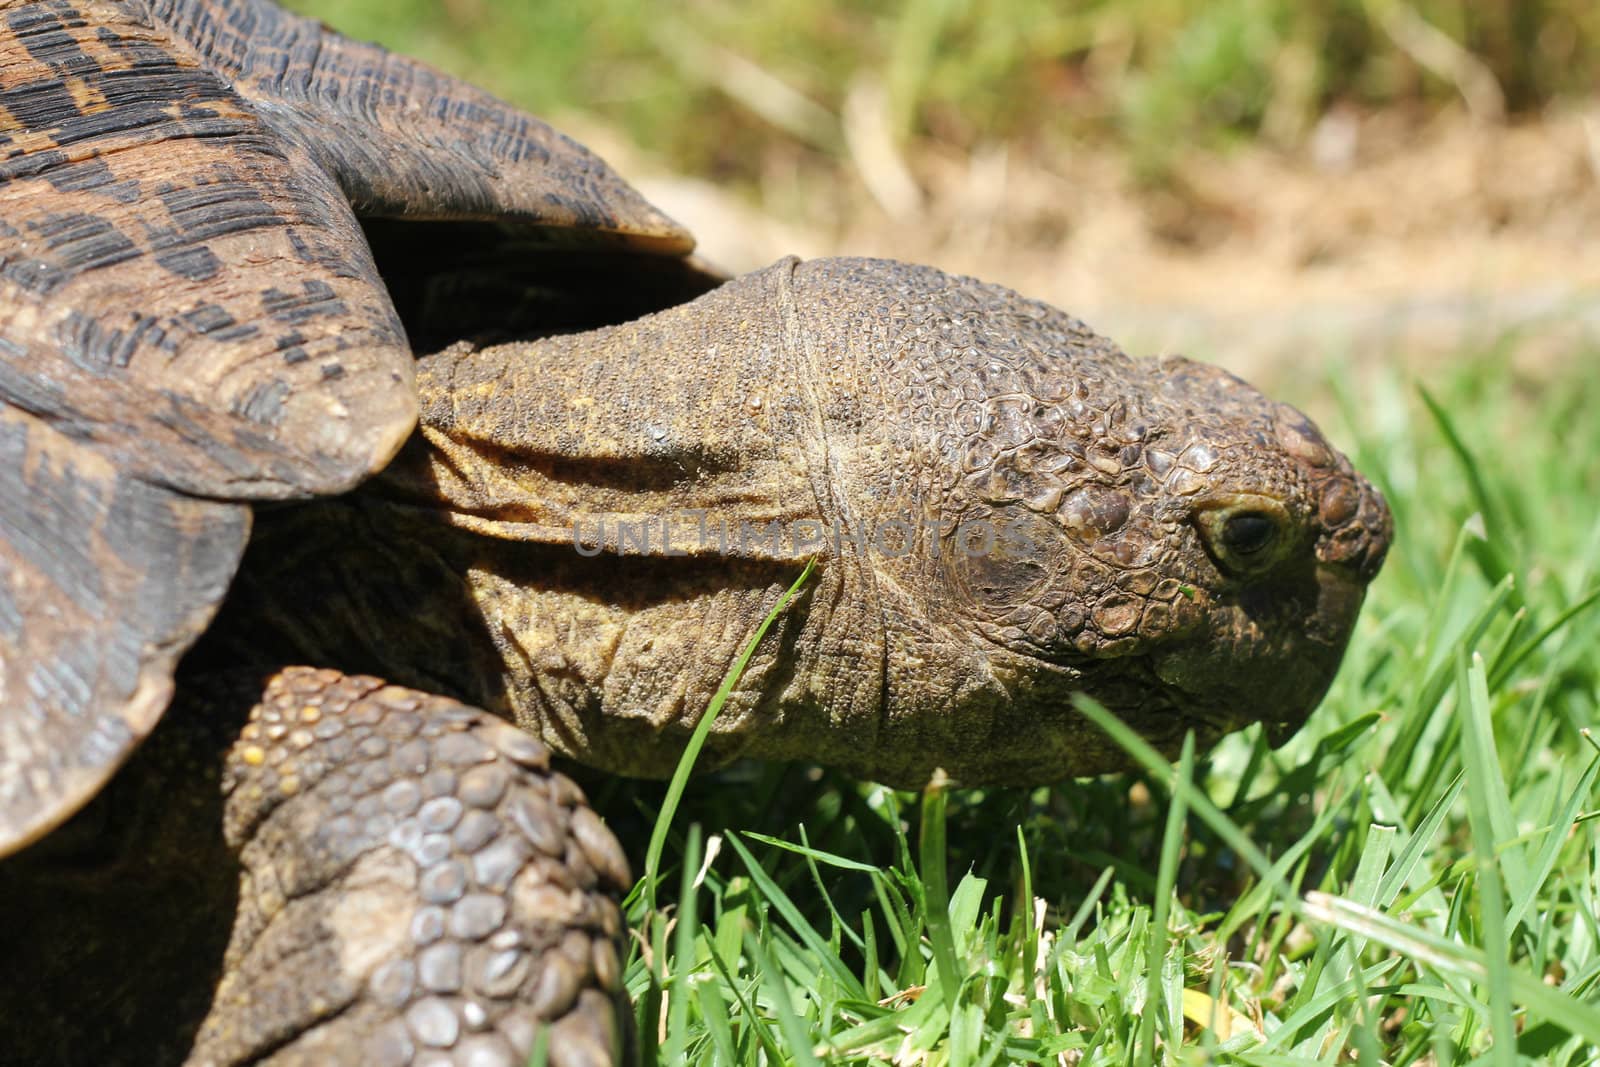 Head of turtle eating grass